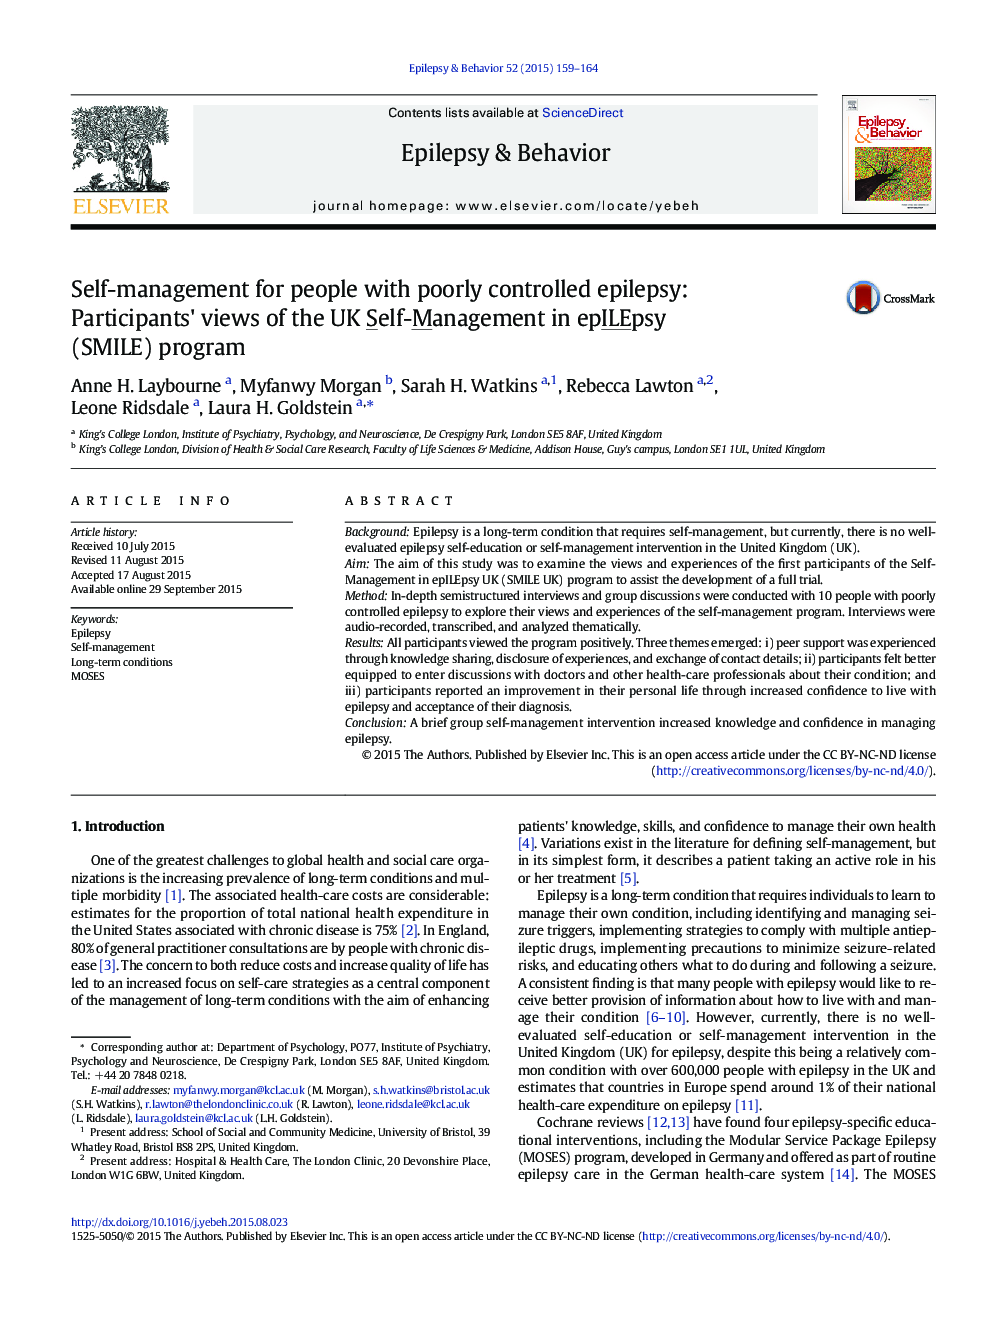 Self-management for people with poorly controlled epilepsy: Participants' views of the UK Self-Management in epILEpsy (SMILE) program